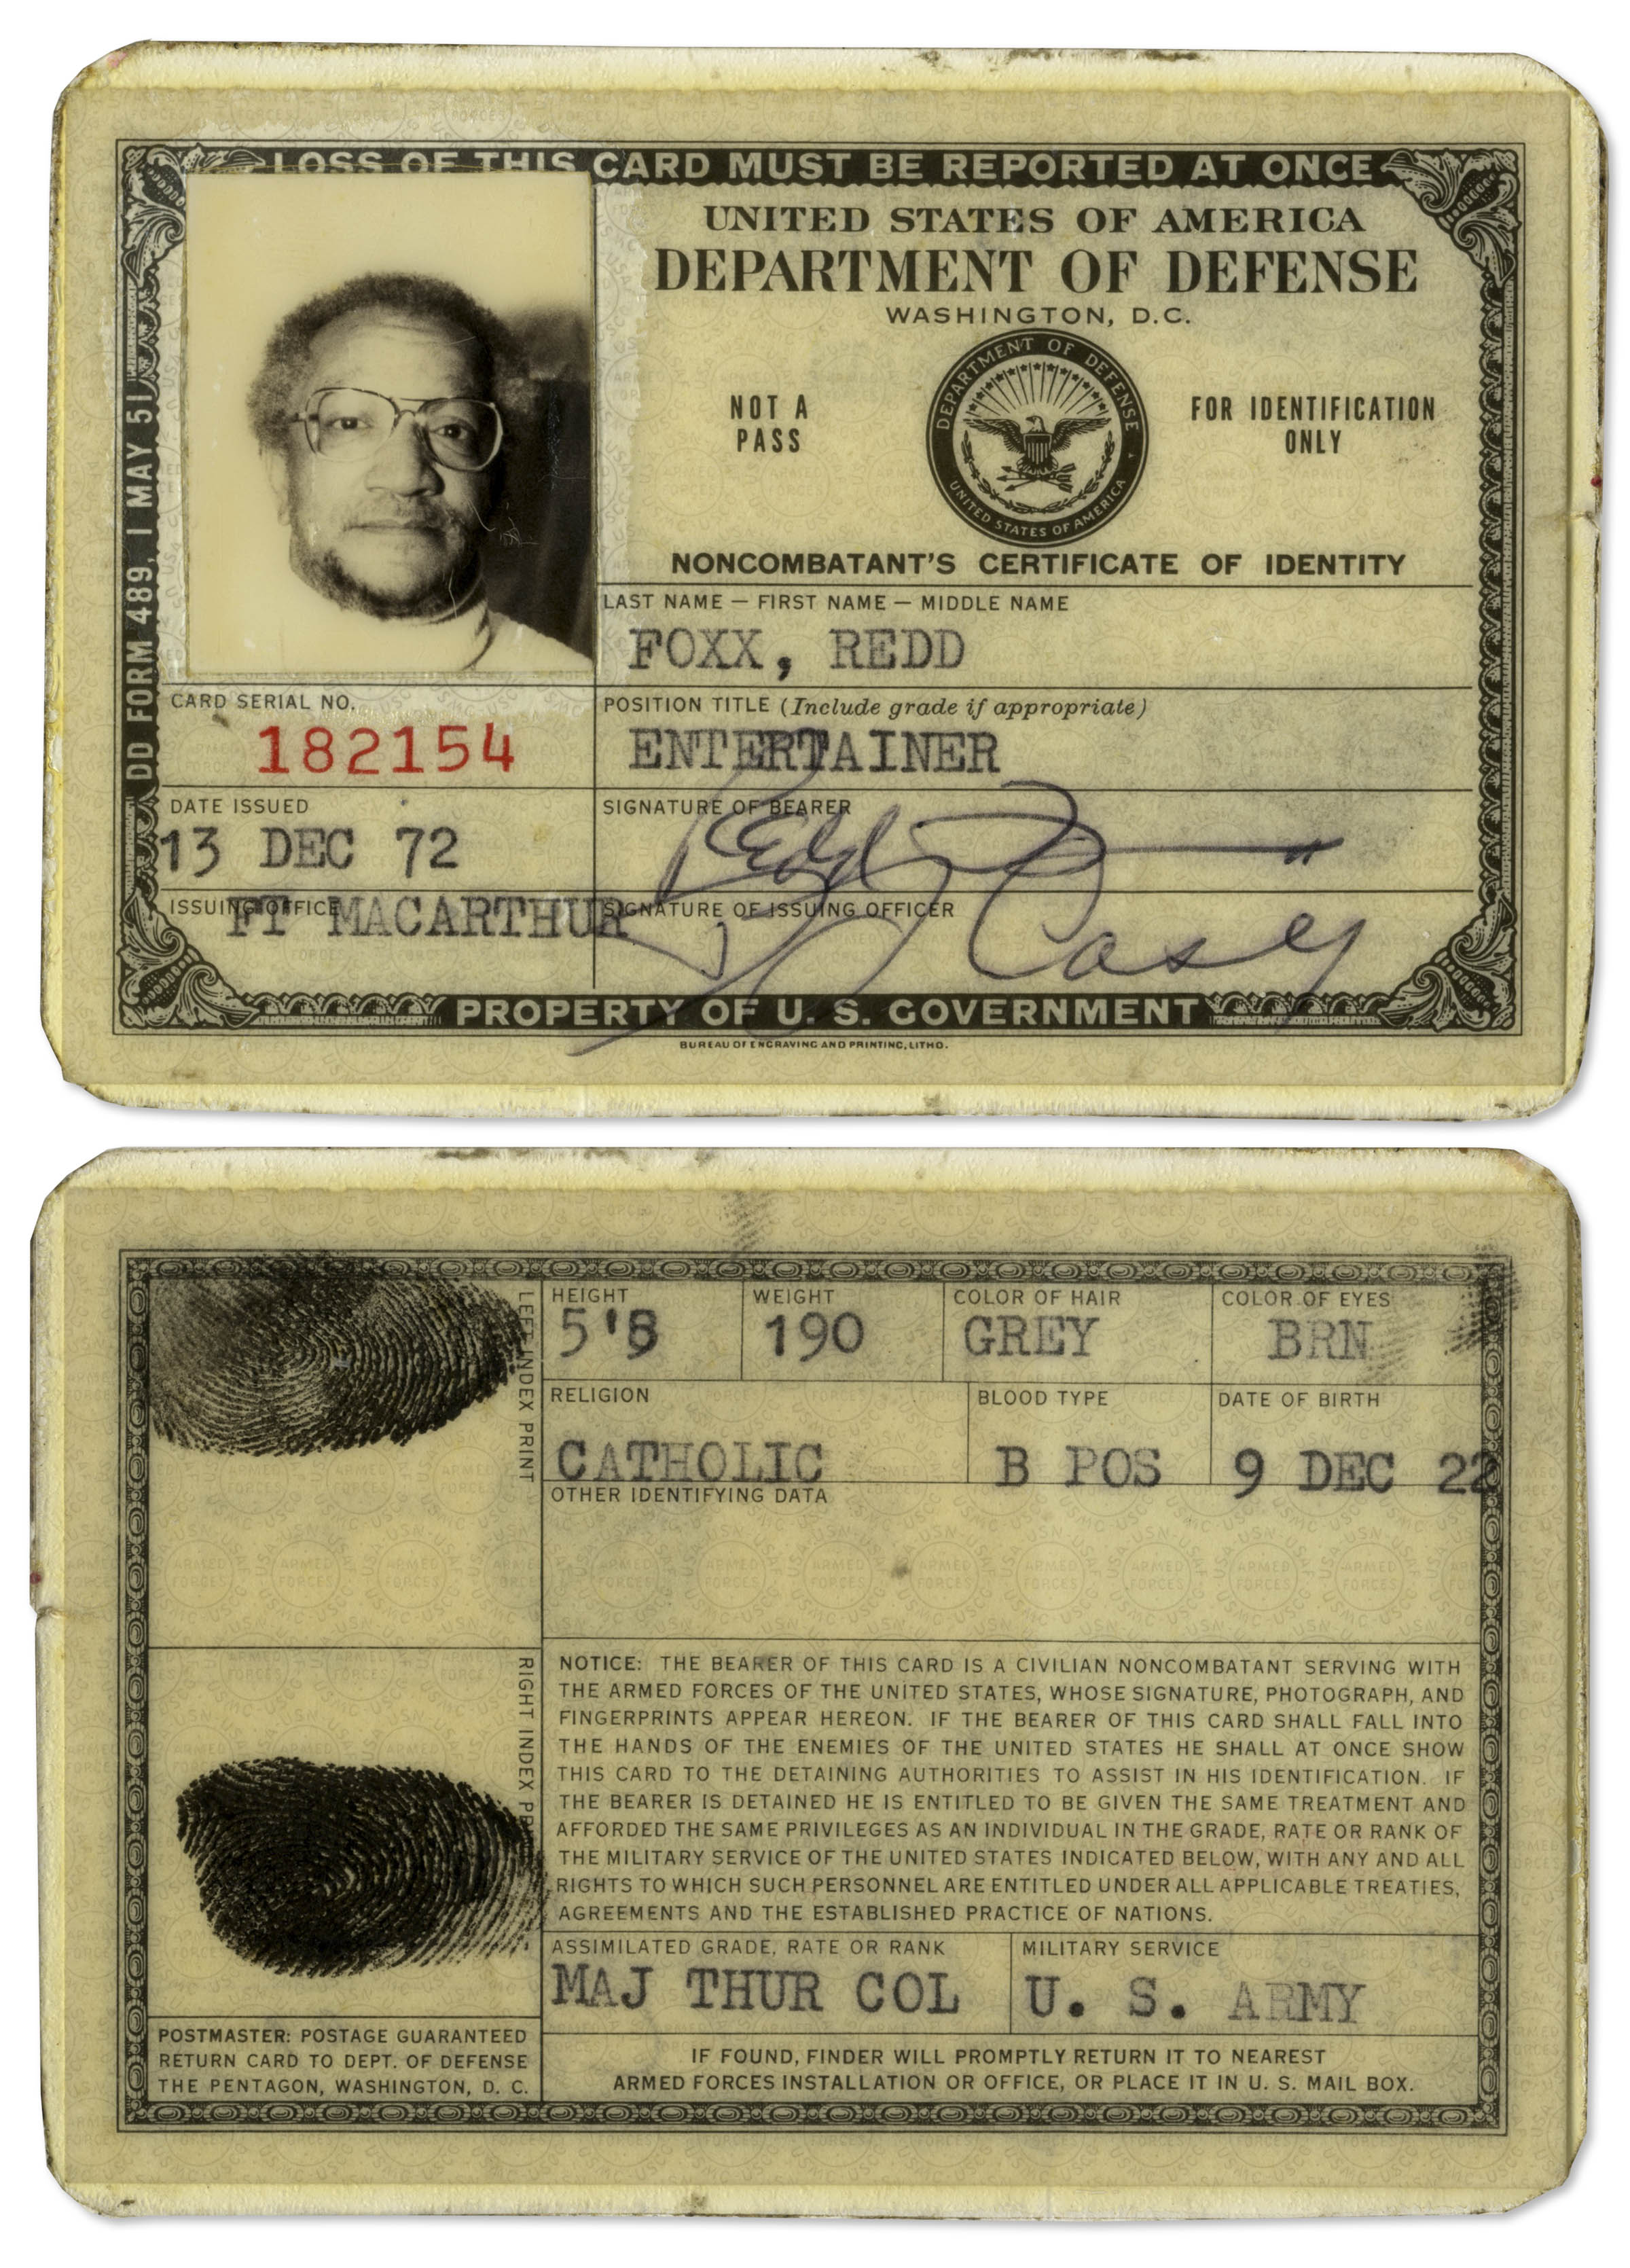 How do you find a local military ID card office?